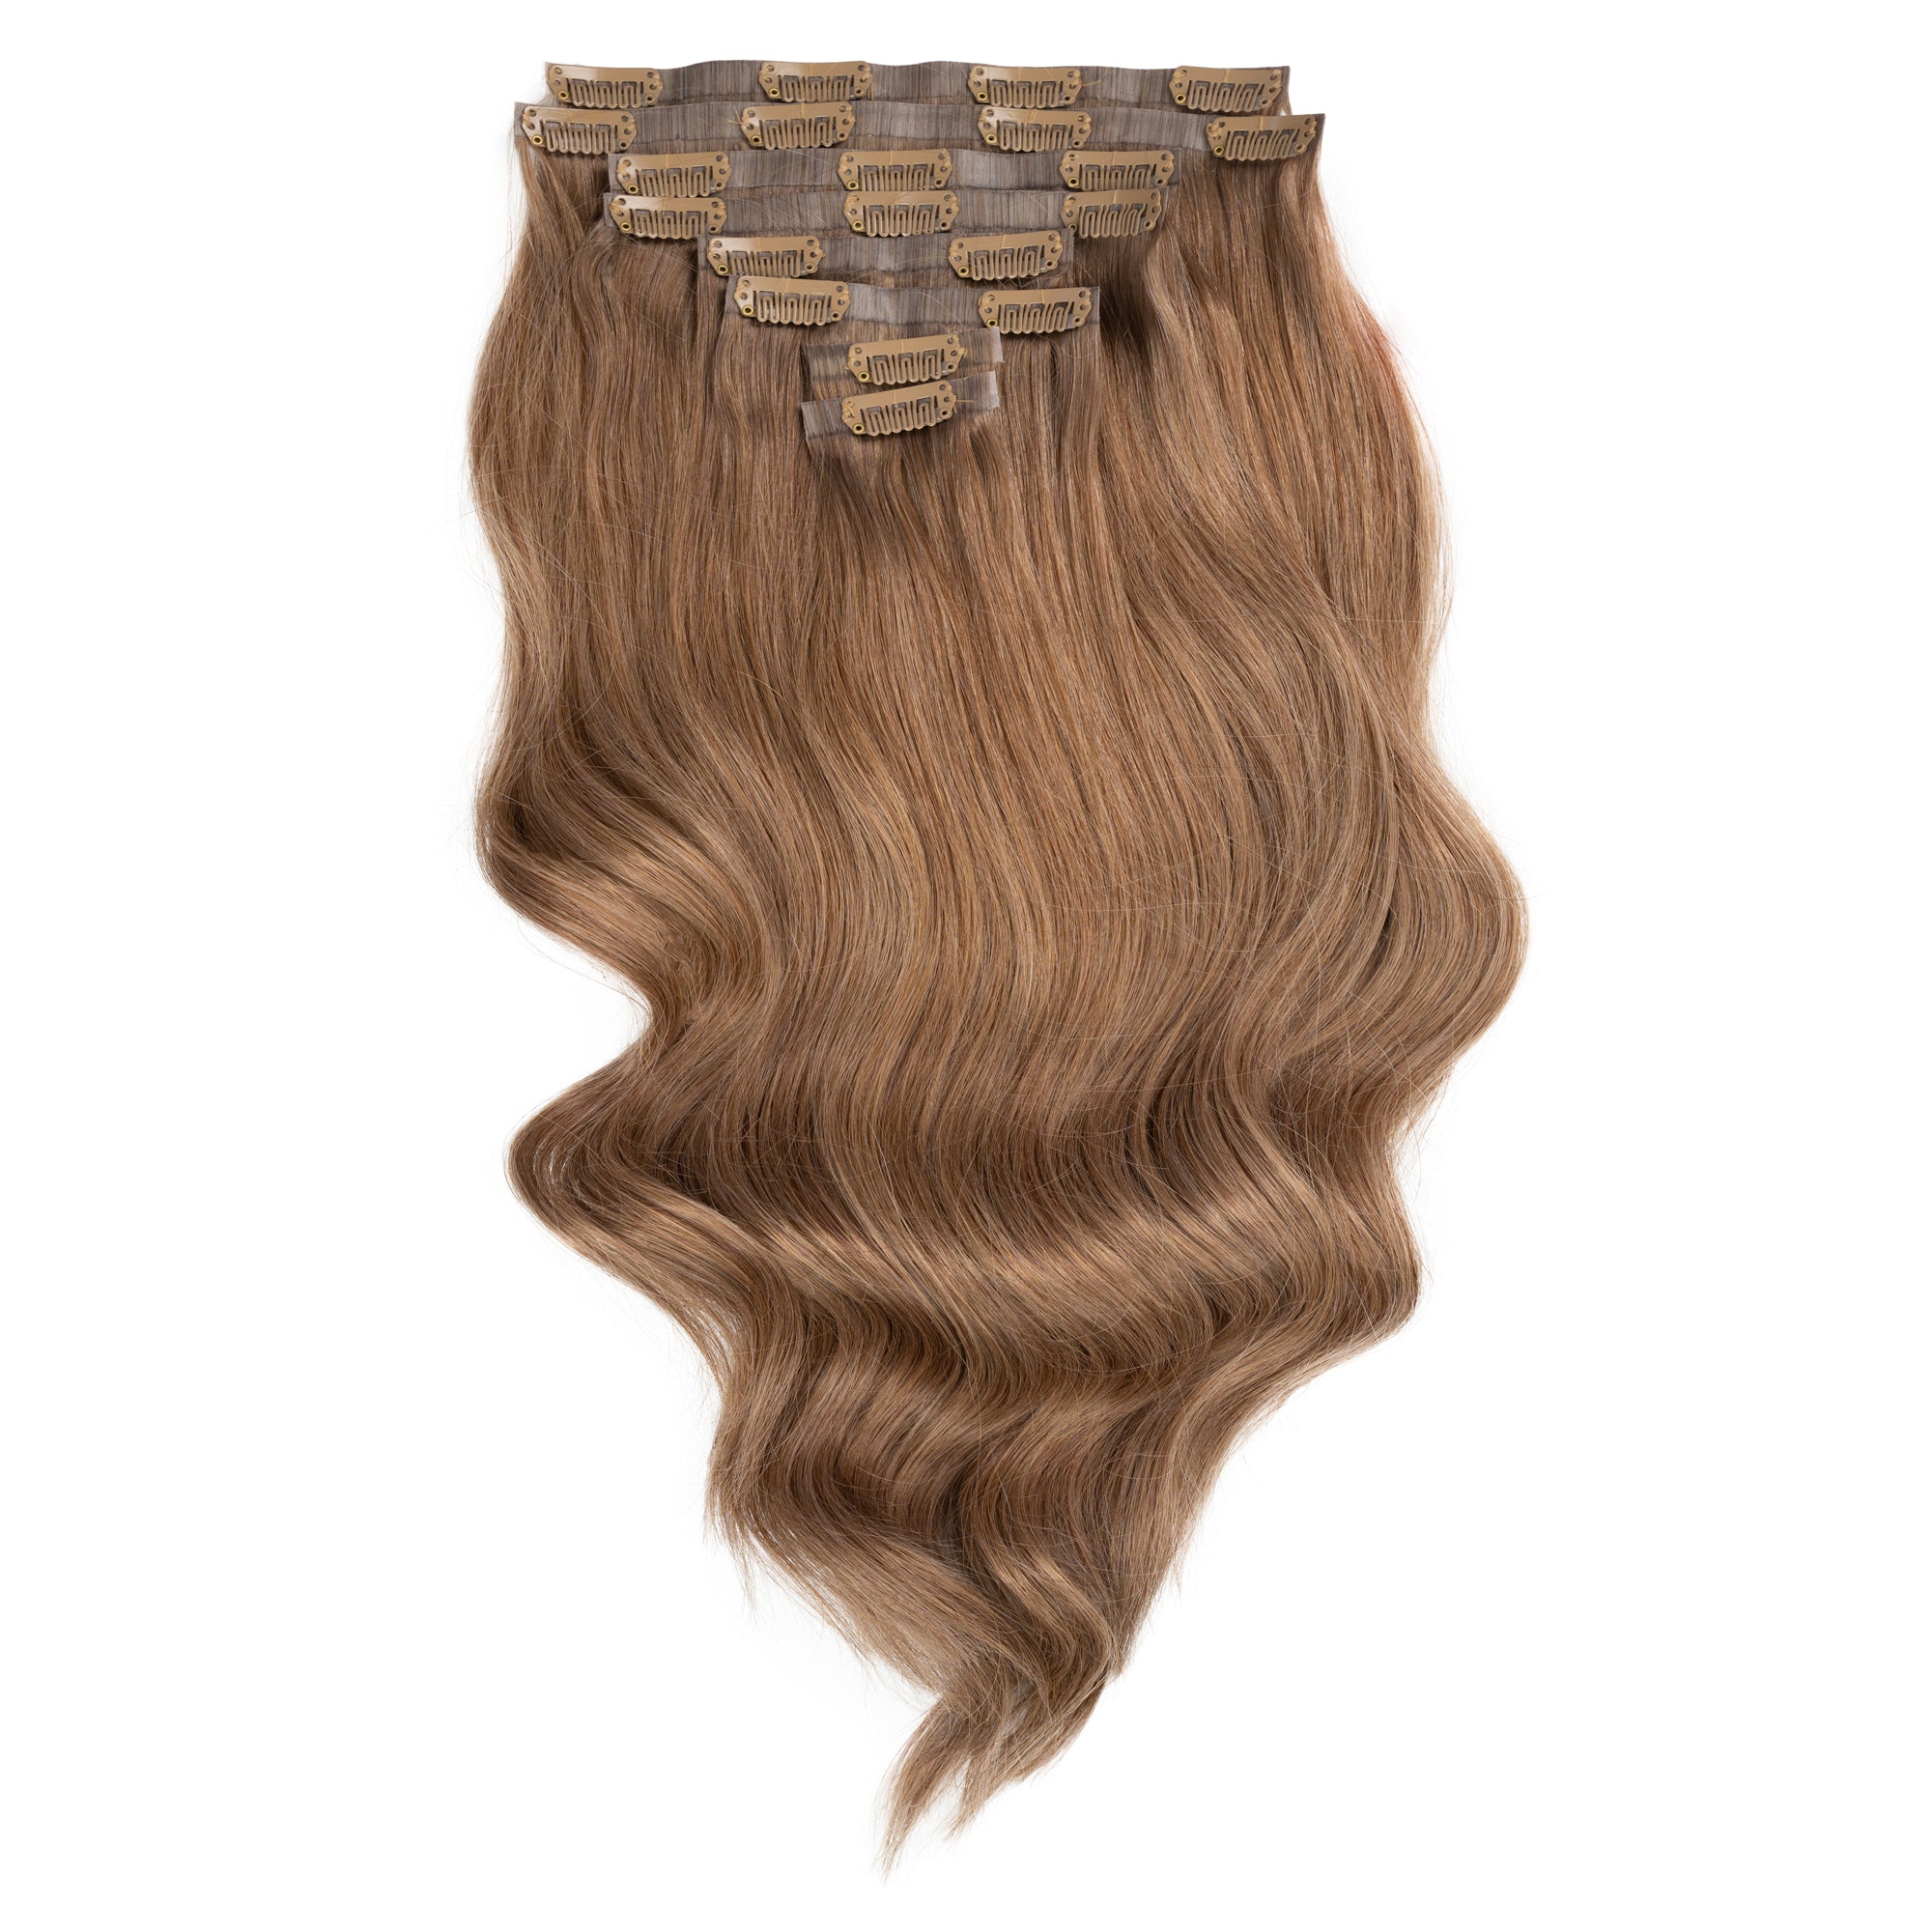 Deluxe Clip-in Hair Extensions 18"Colour 10 Dark Blonde - Maneology Hair Extensions